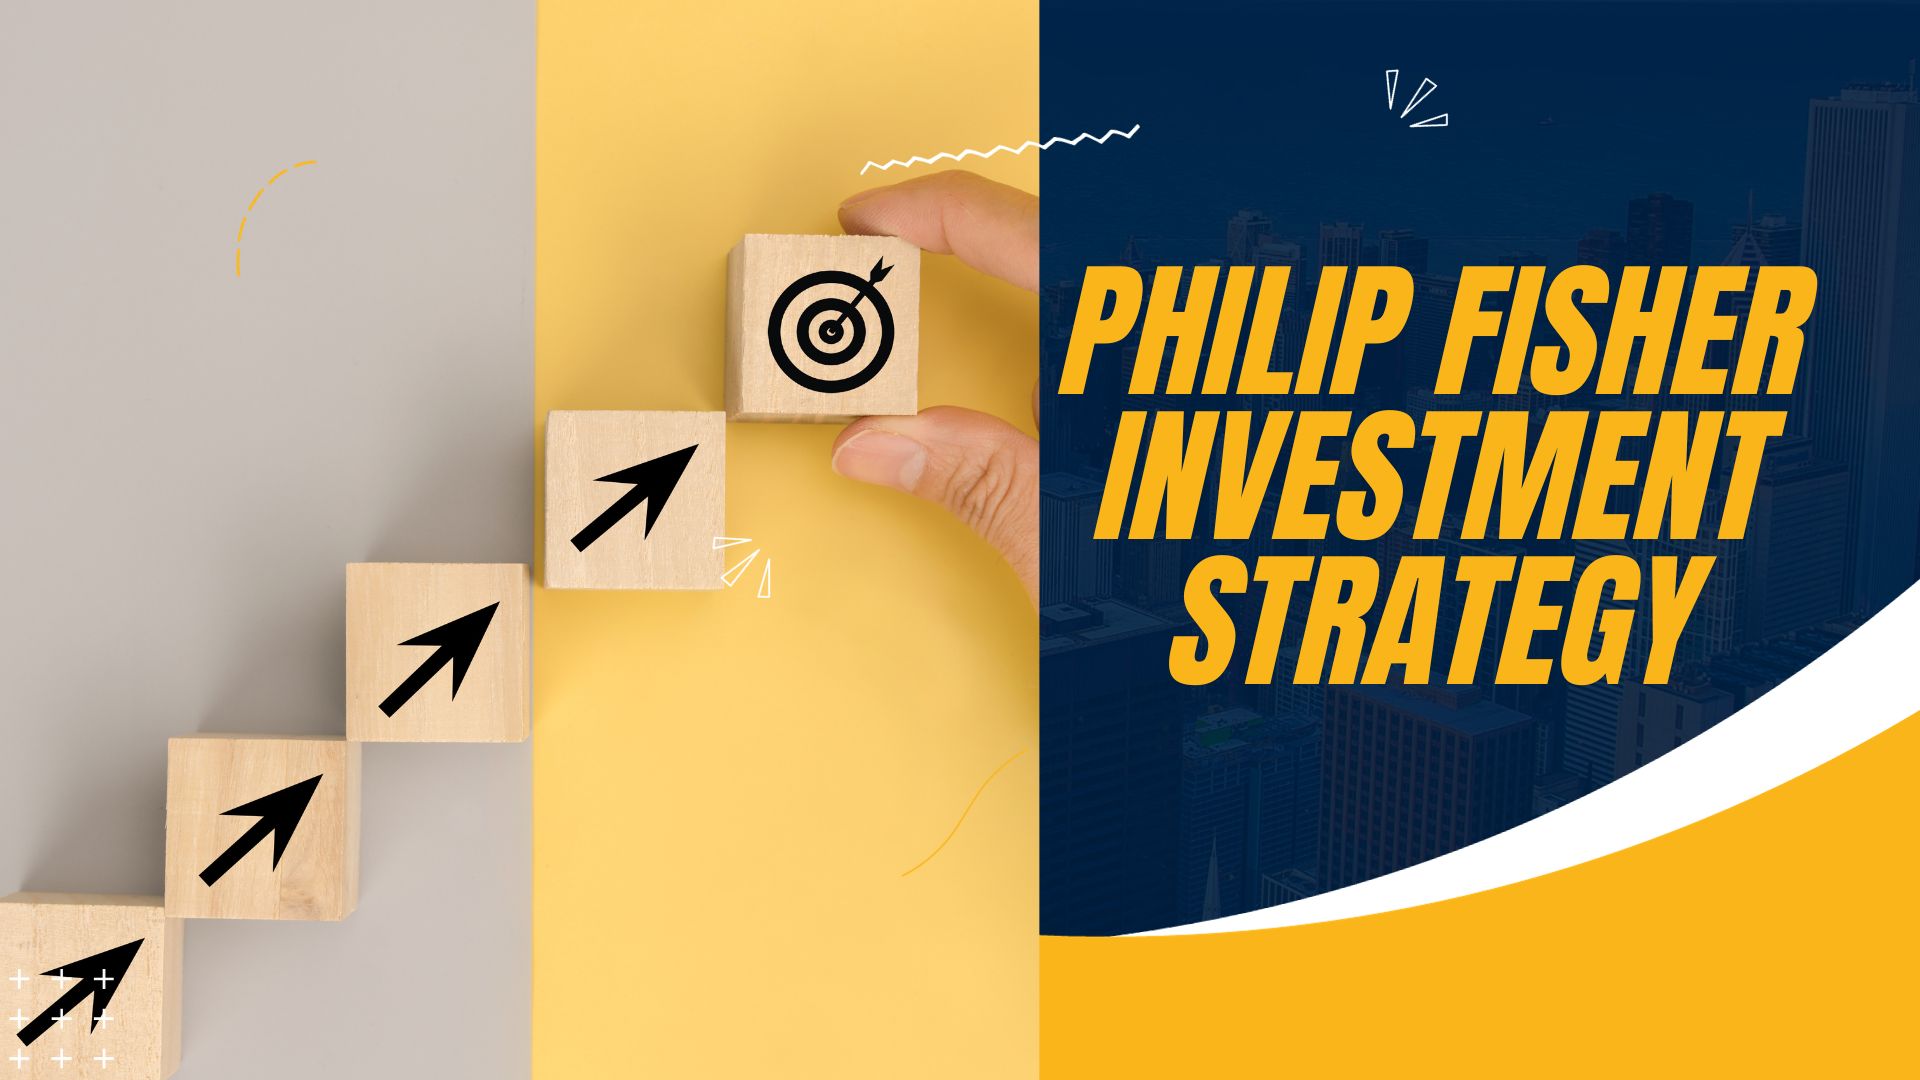 Philip Fisher Investment Strategy